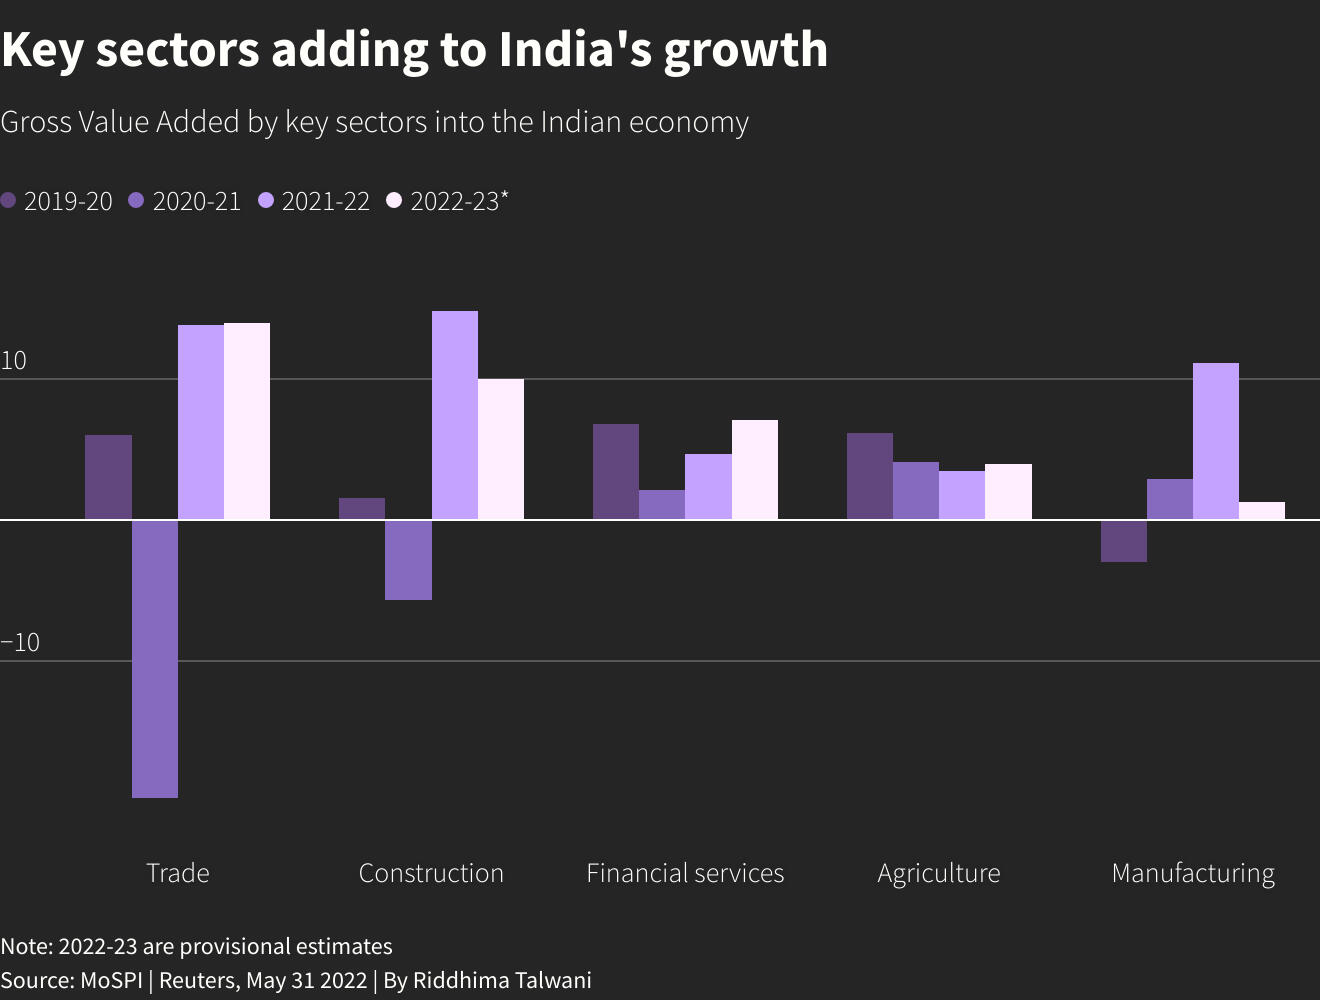 Key sectors adding to India’s growth